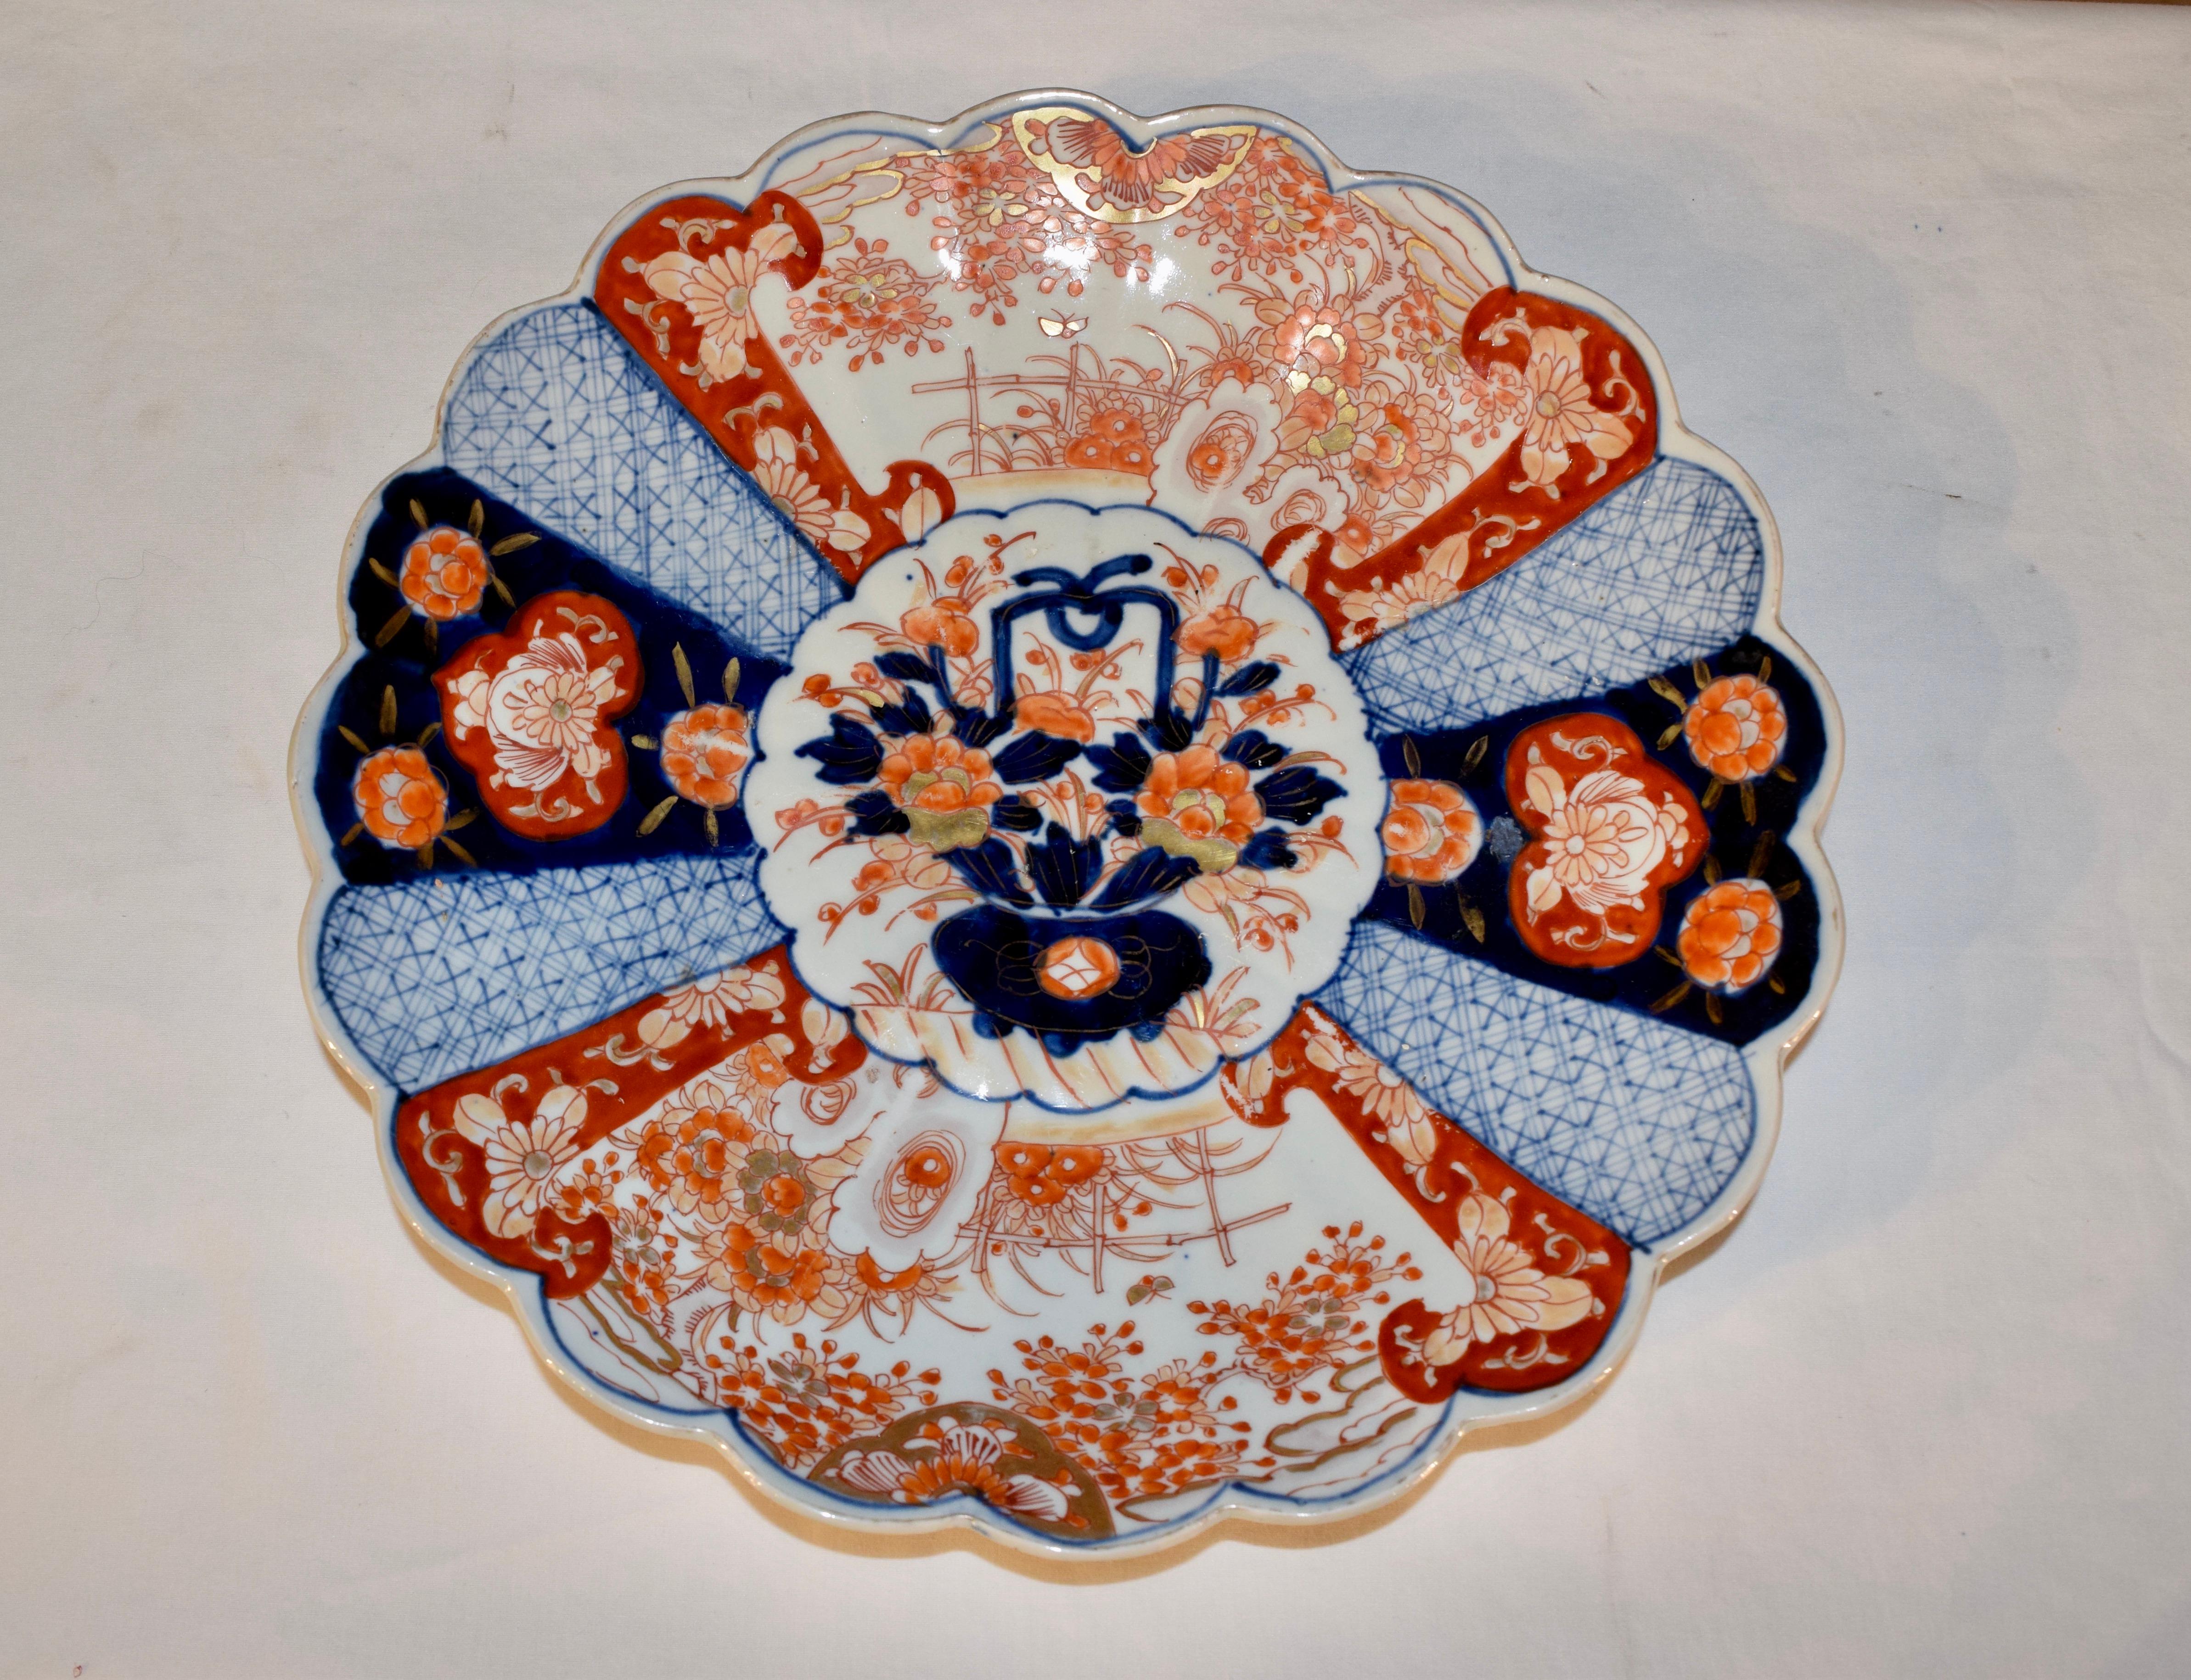 19th century Imari charger from Japan with a central medallion containing a hand polychromed flower basket, surrounded by a fan design, all containing patterns alternating with florals and garden scenes.